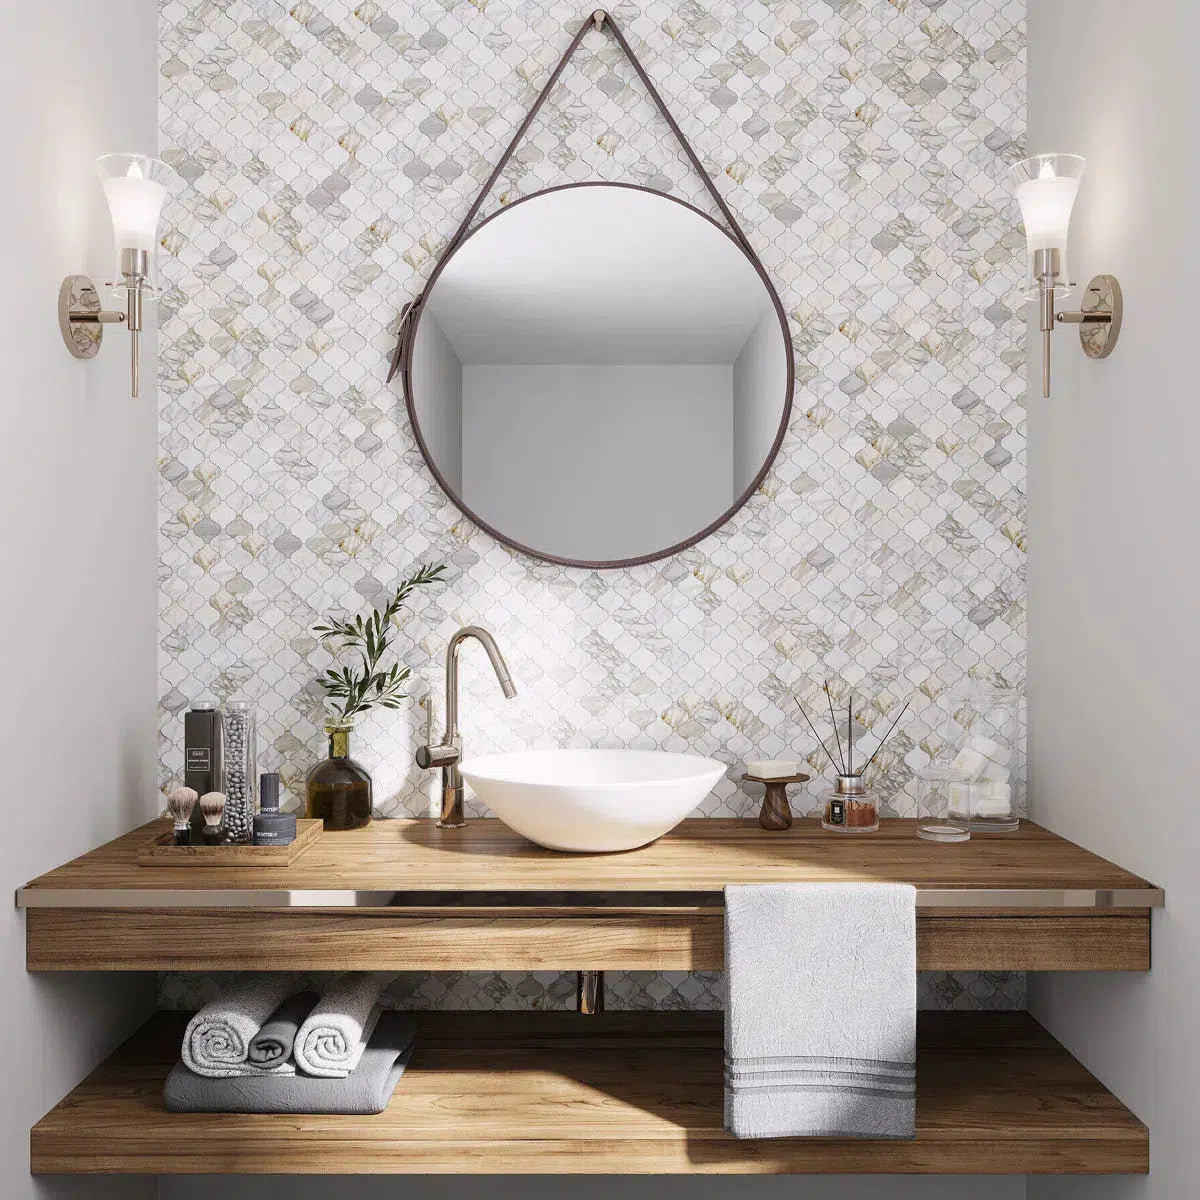 Natural bathroom with wood vanity and Calacatta Gold arabesque tile walls